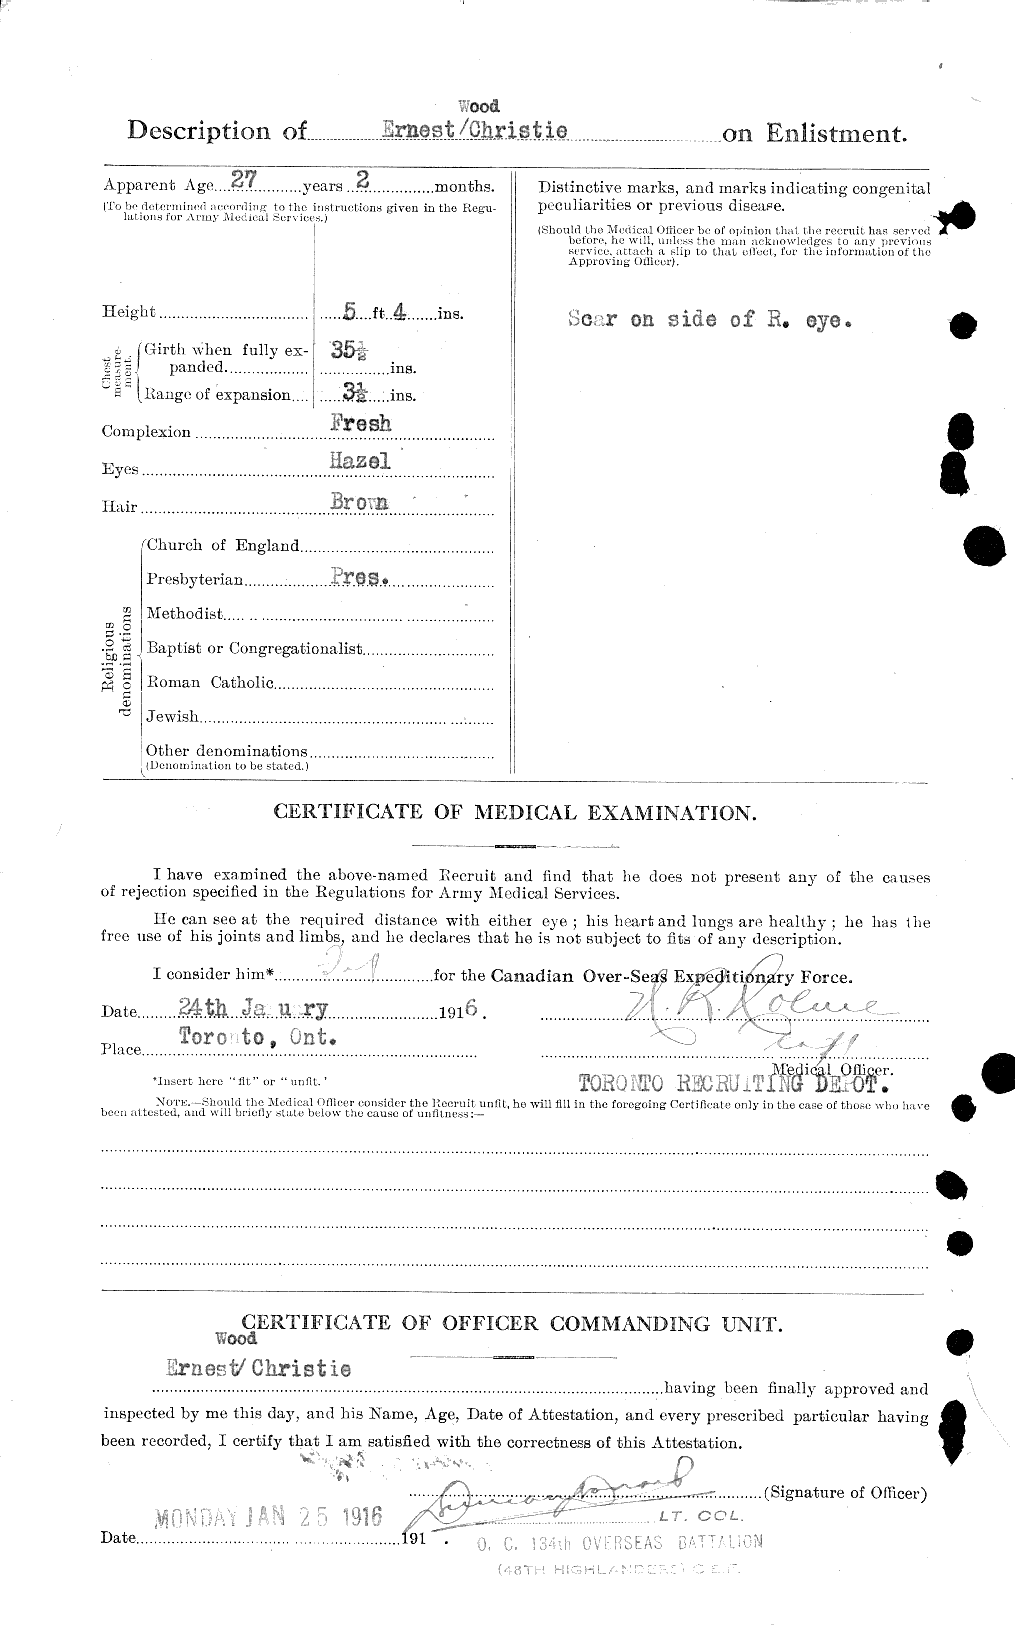 Personnel Records of the First World War - CEF 021923b